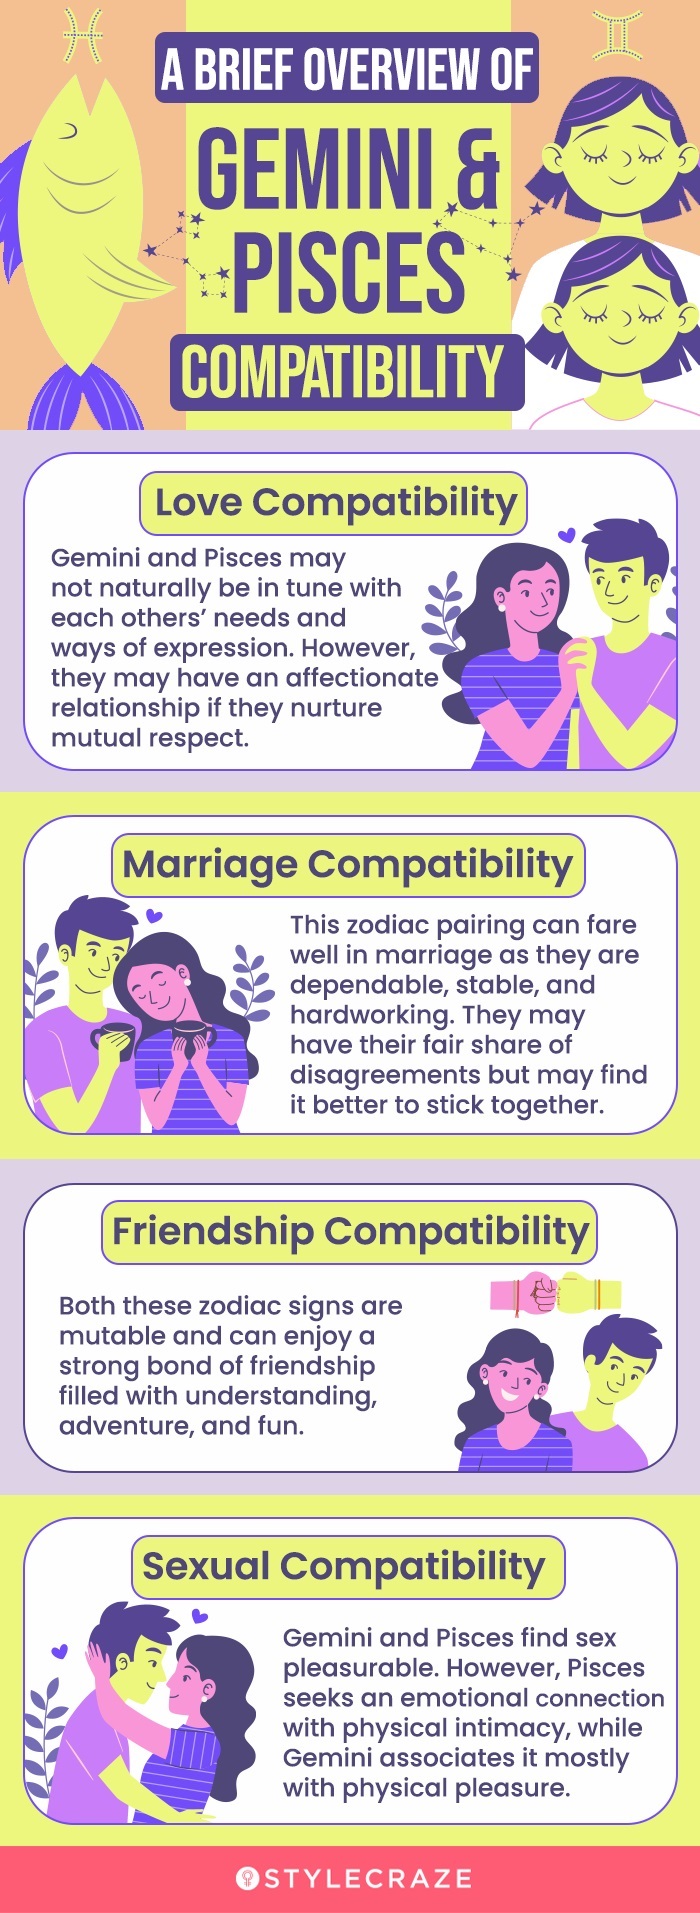 a brief overview of gemini and pisces compatibility [infographic]